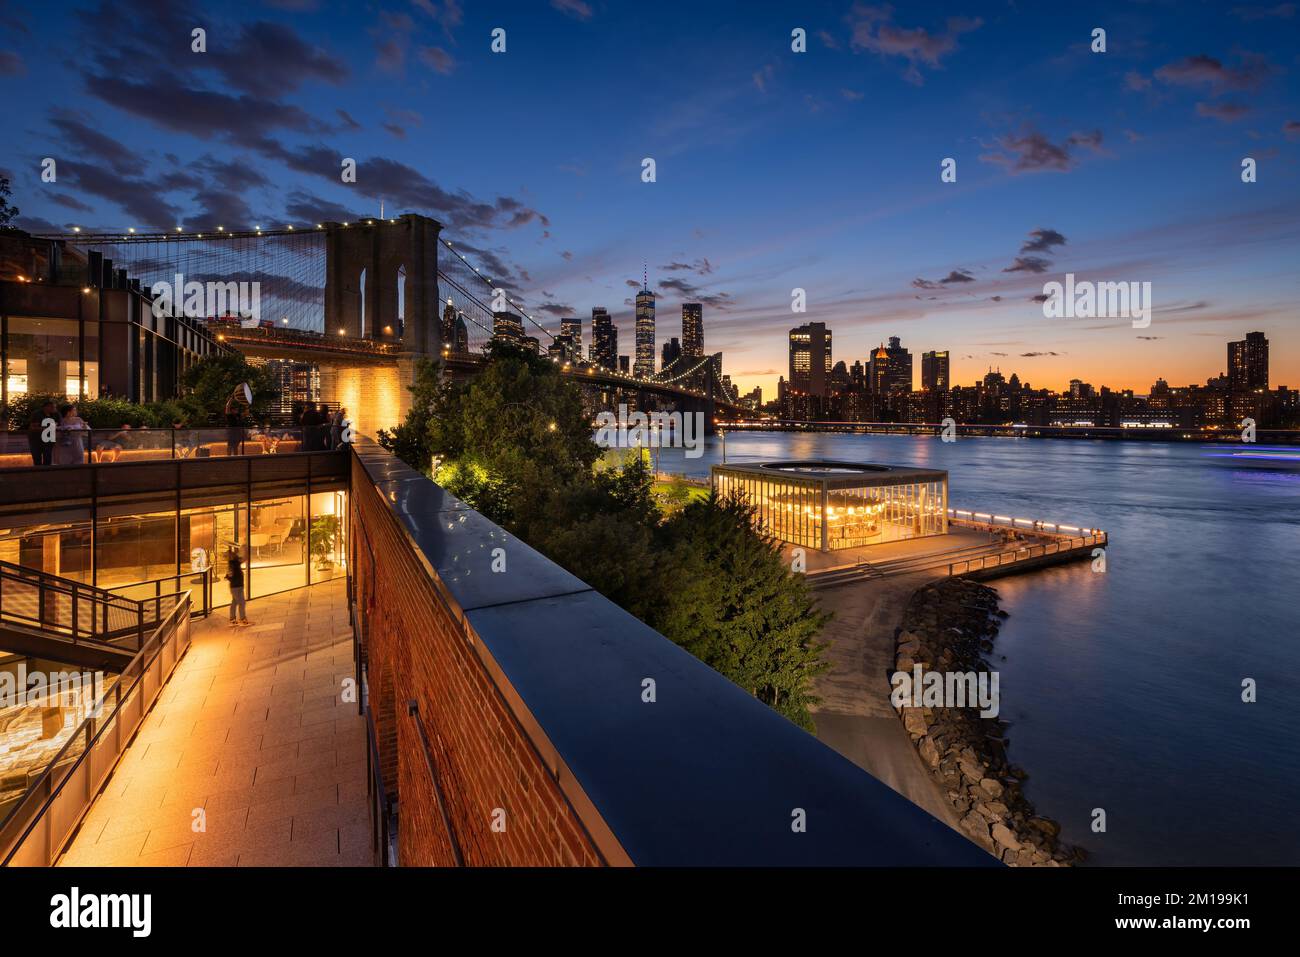 Evening view of the Brooklyn Bridge, Lower Manhattan skyscrapers from the Empire Stores shopping mall, DUMBO, Brooklyn, New York City Stock Photo